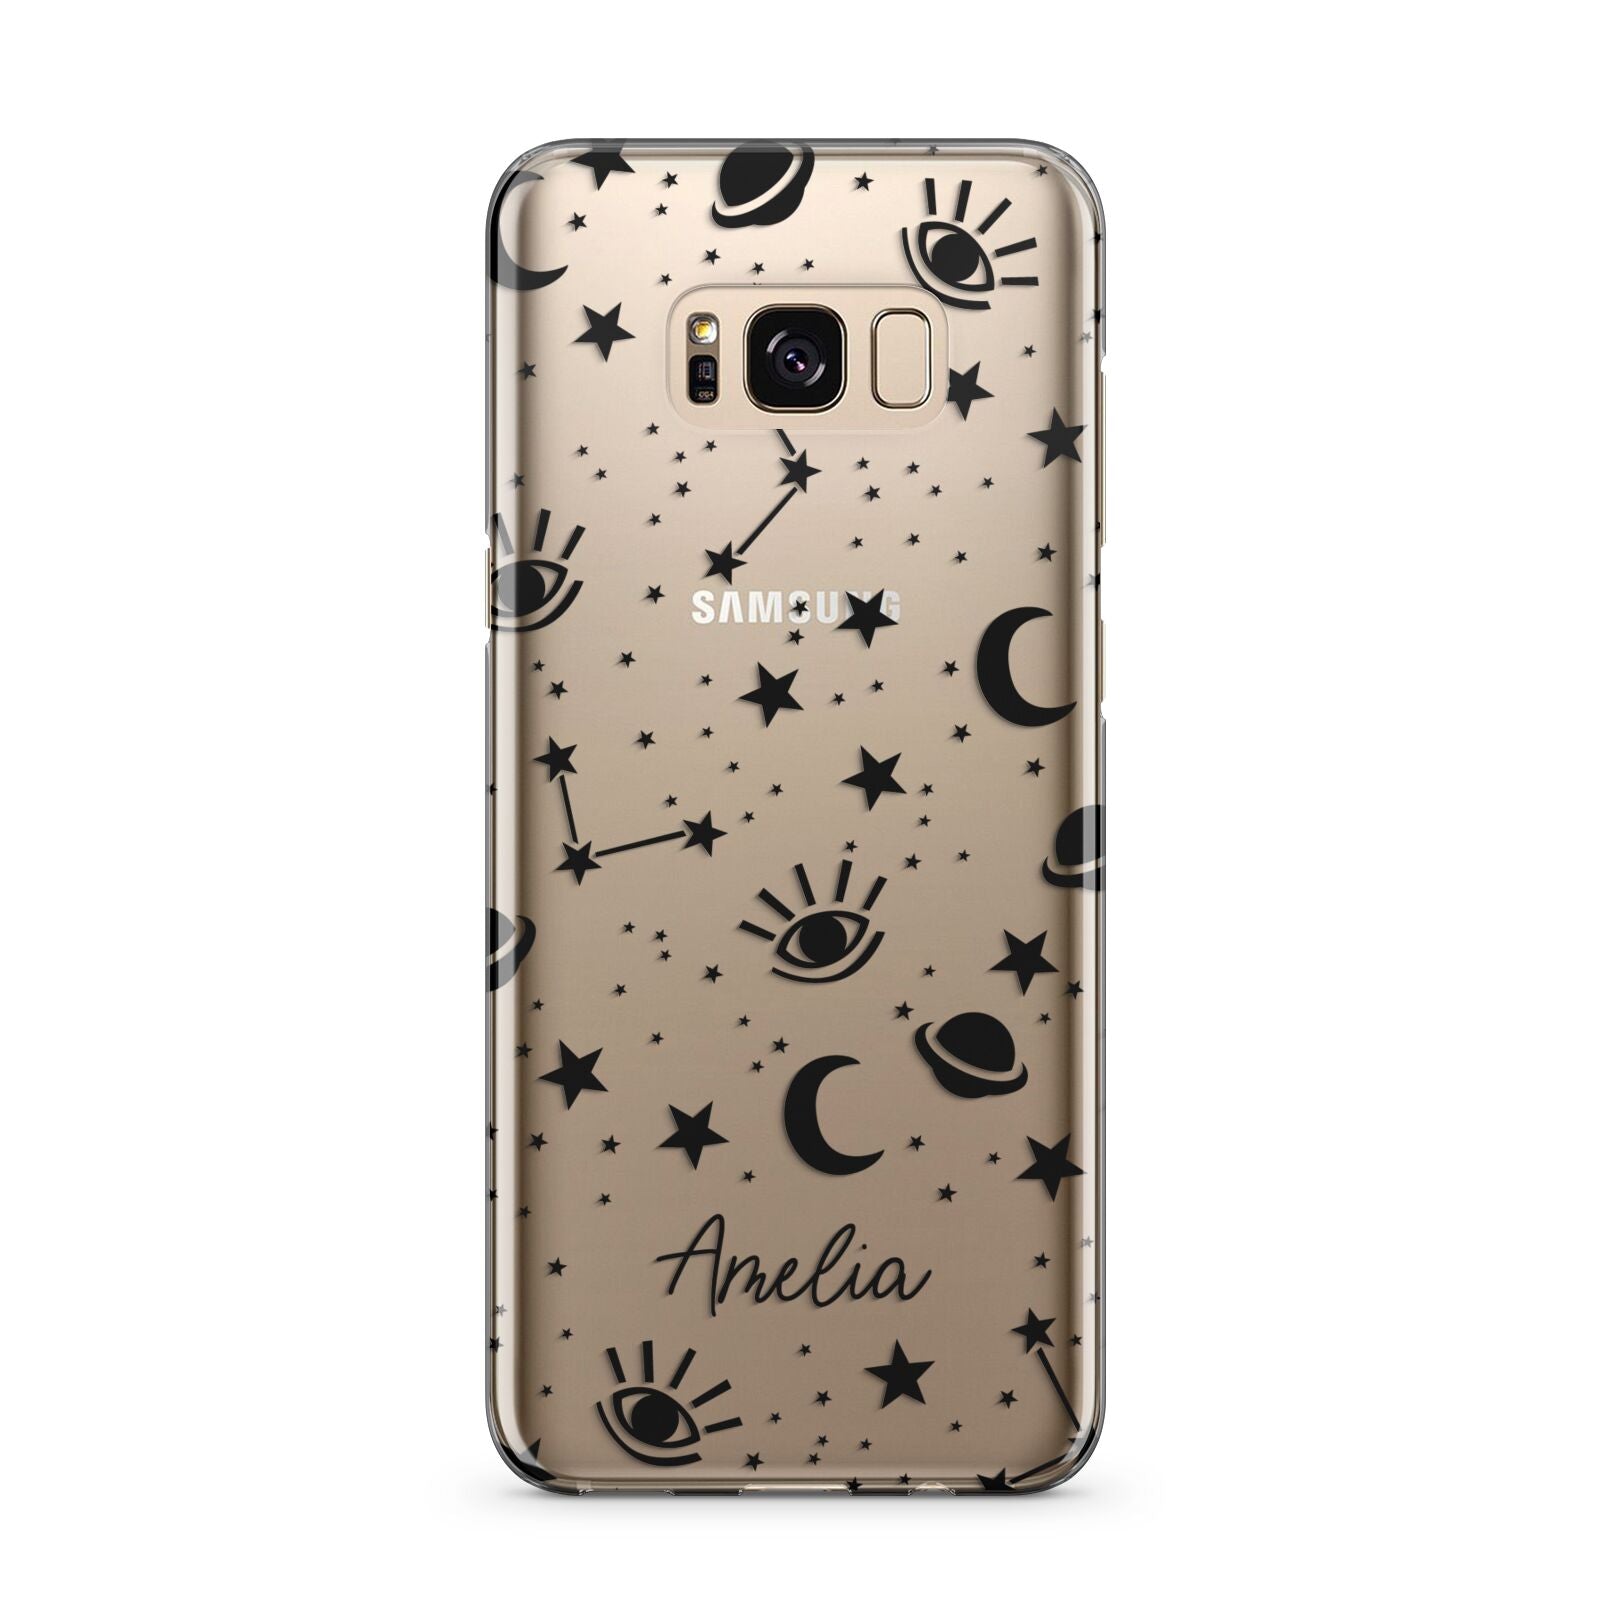 Monochrome Zodiac Constellations with Name Samsung Galaxy S8 Plus Case